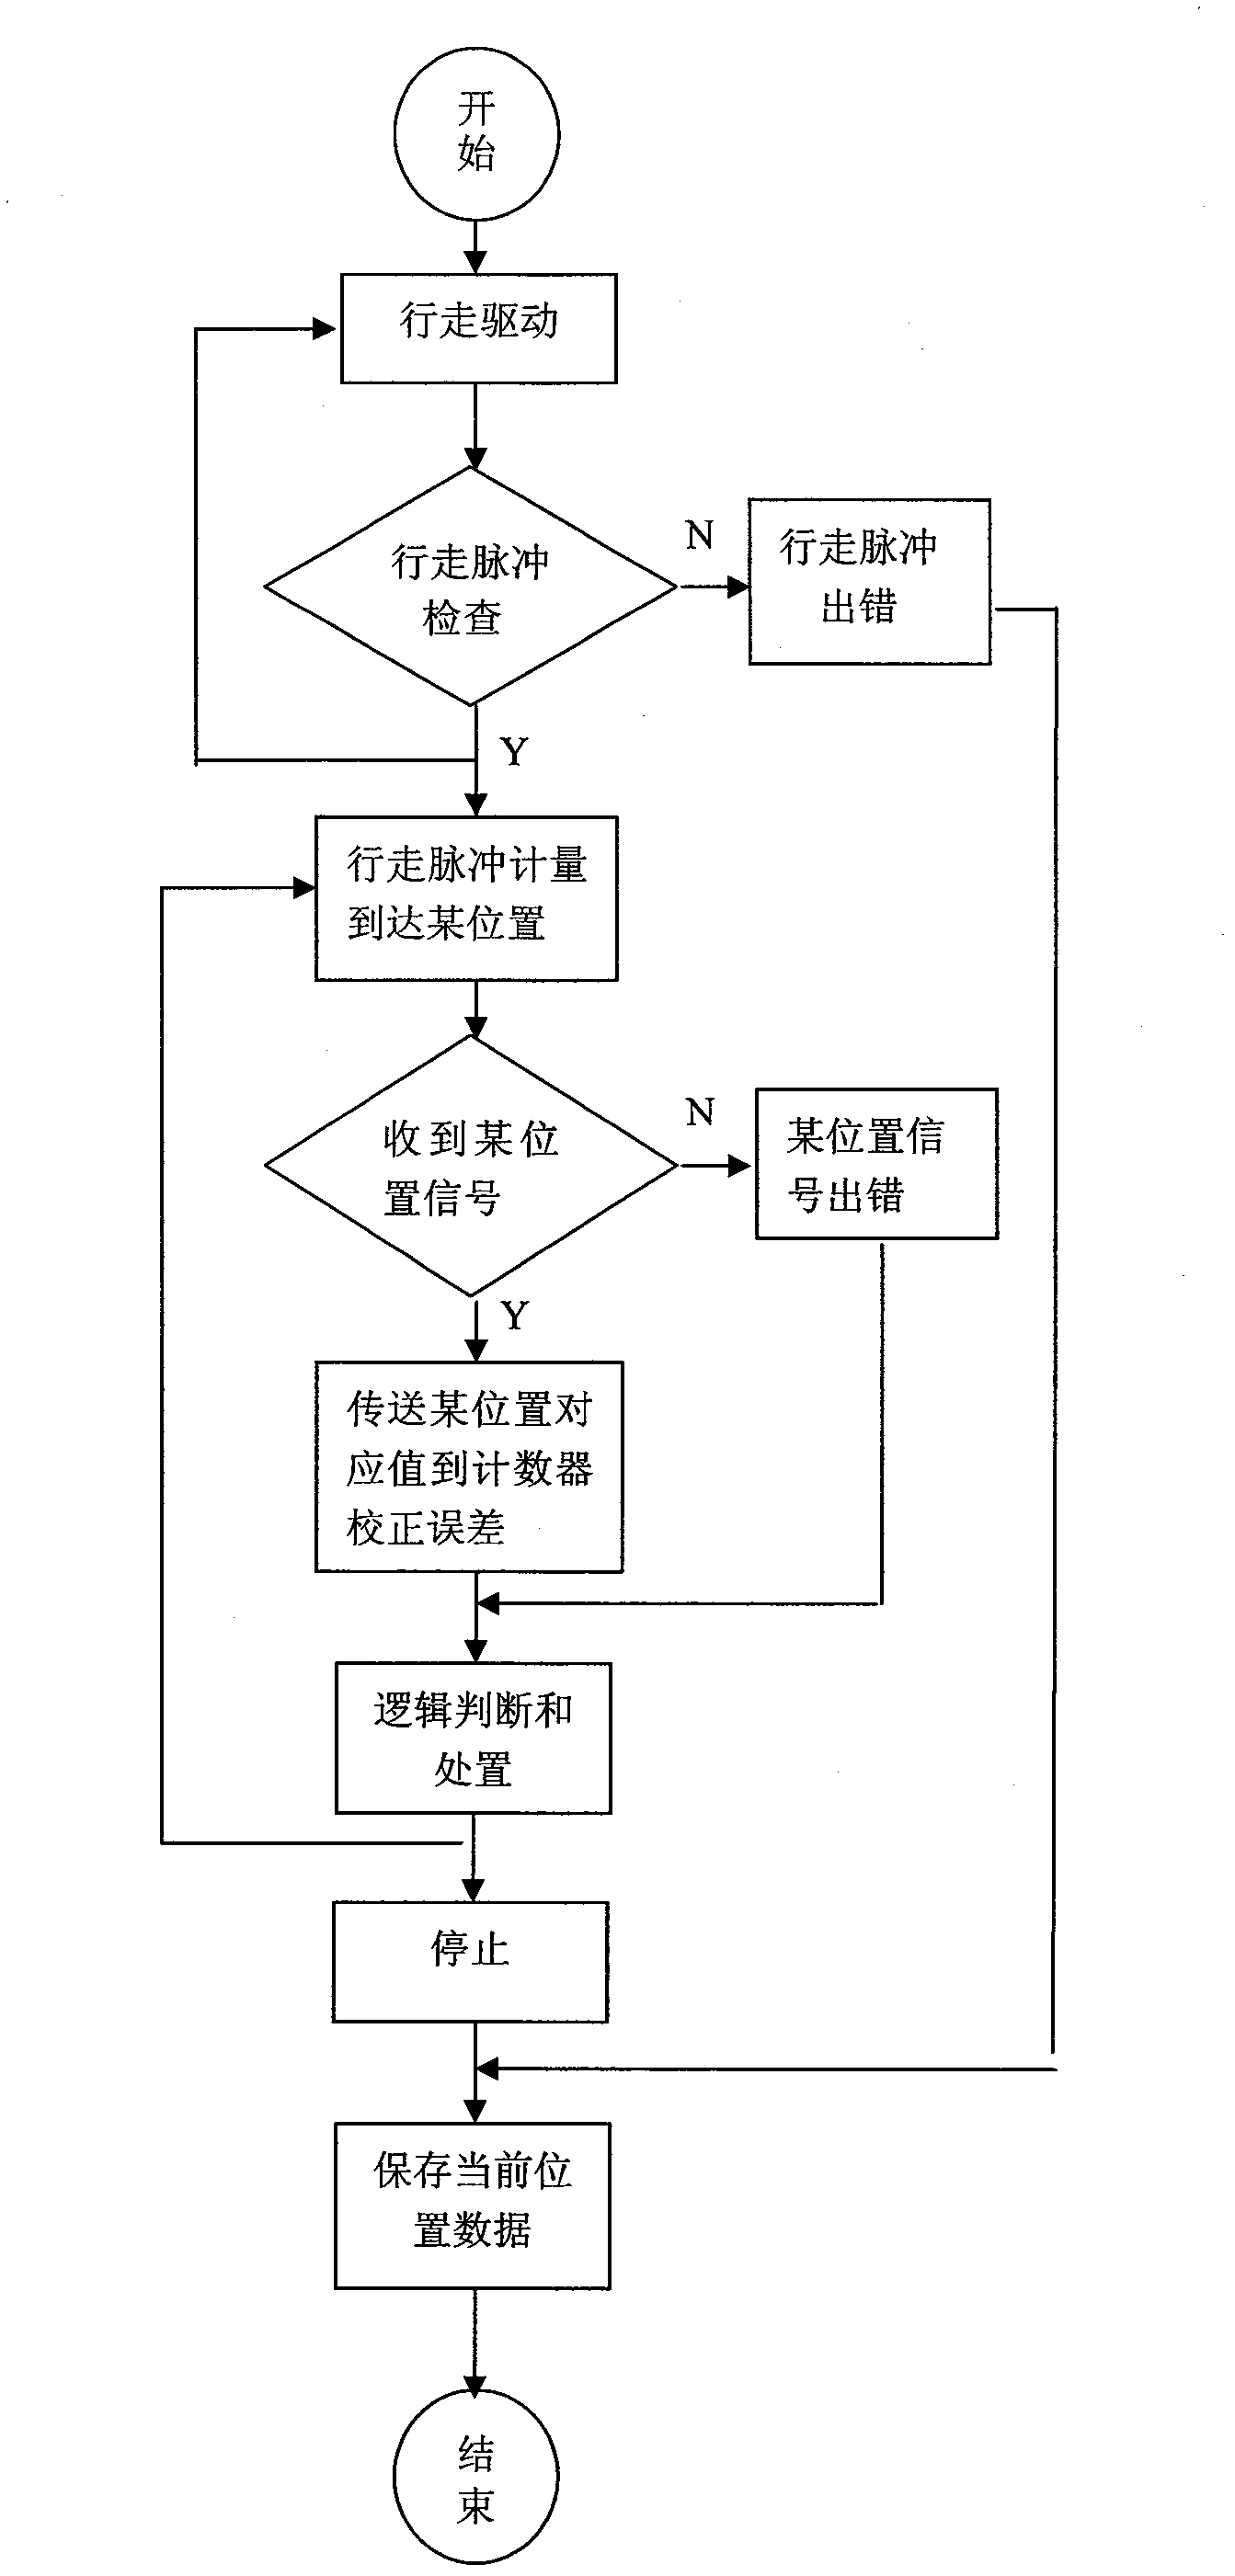 Device and method for determining real-time position of stacker and reclaimer to avoid collision accidents